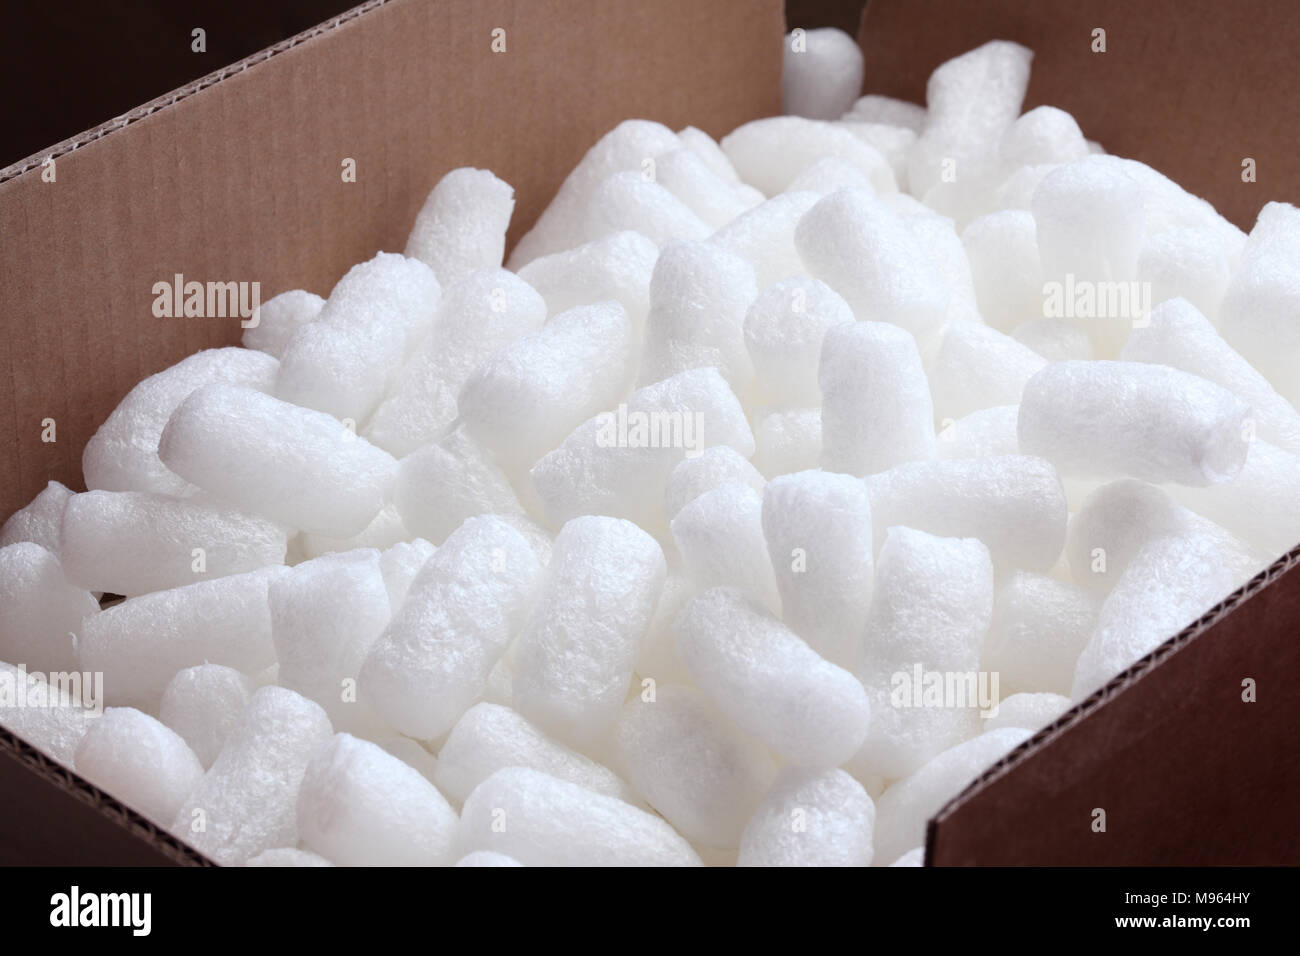 Polystyrene or styrofoam protective packaging beads Stock Photo